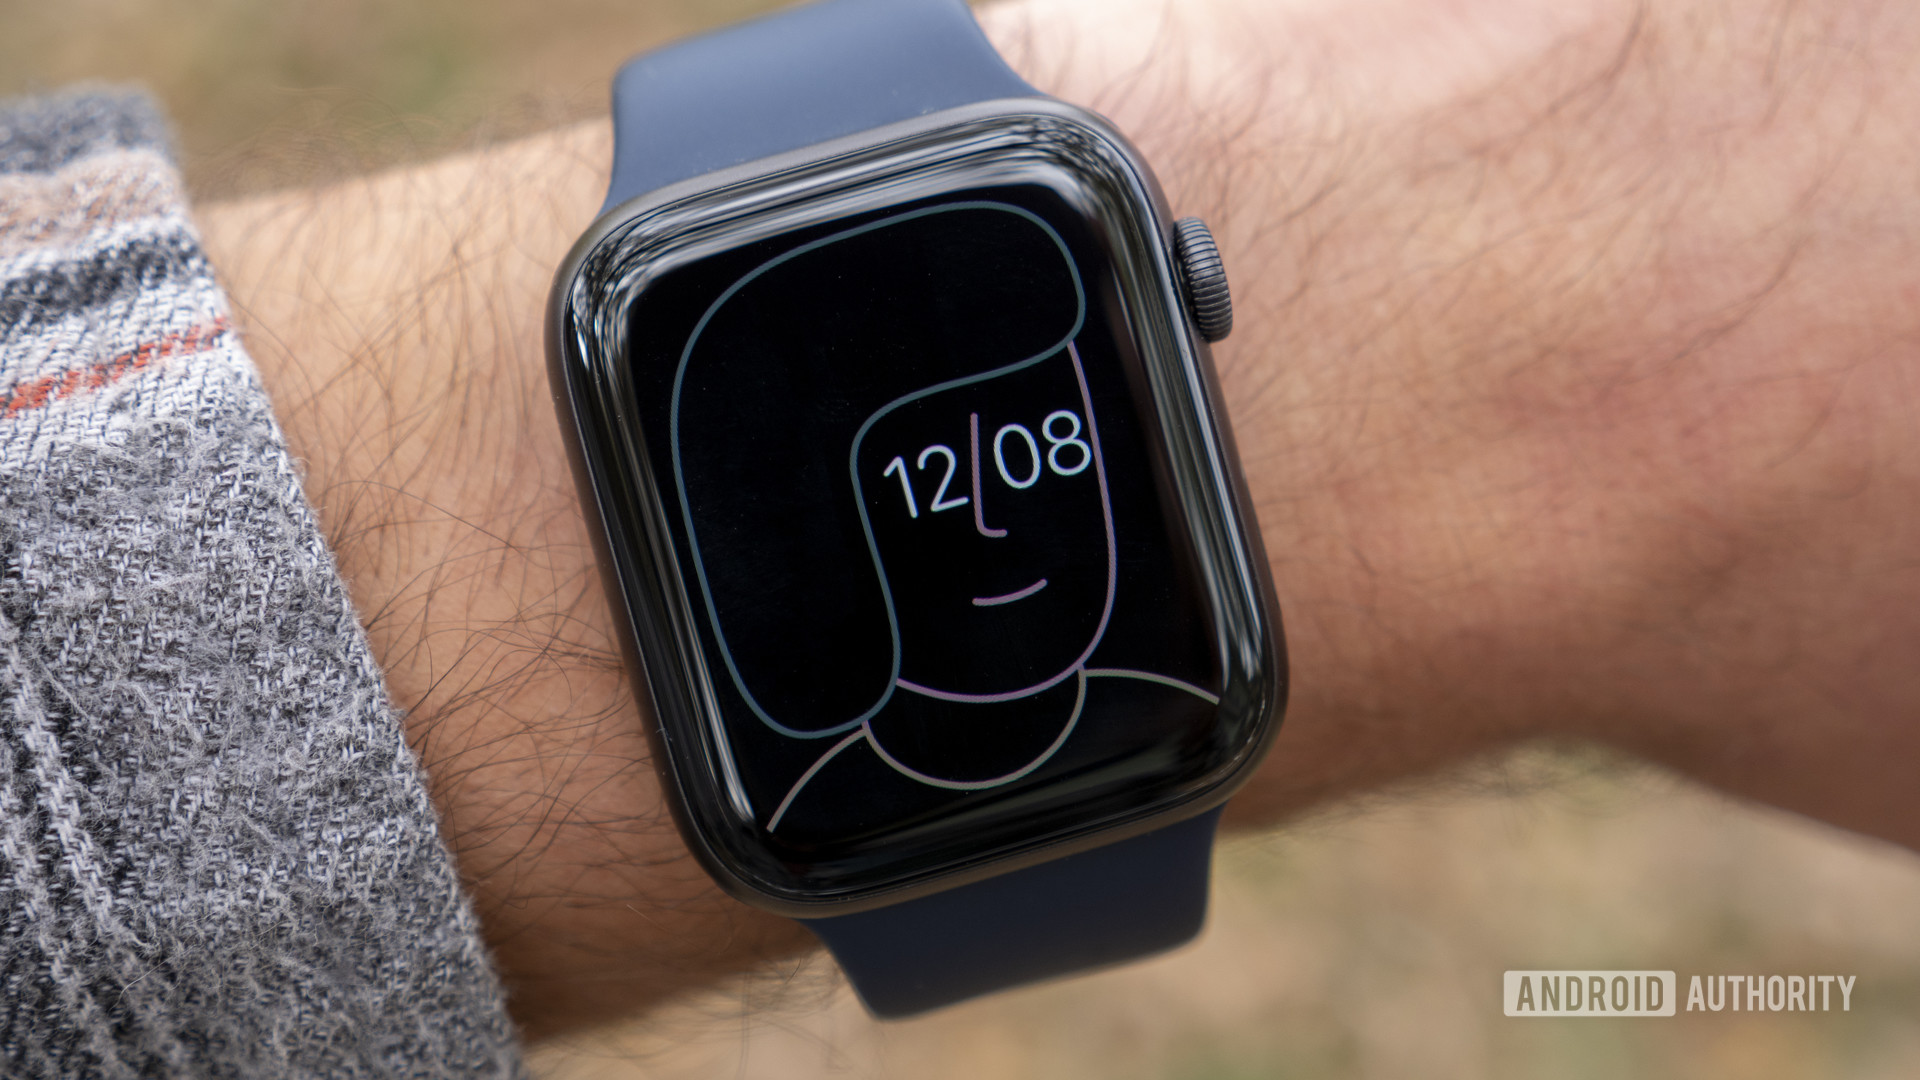 A user wears an Apple Watch Series 6 on his wrist displaying the Artist watch face.